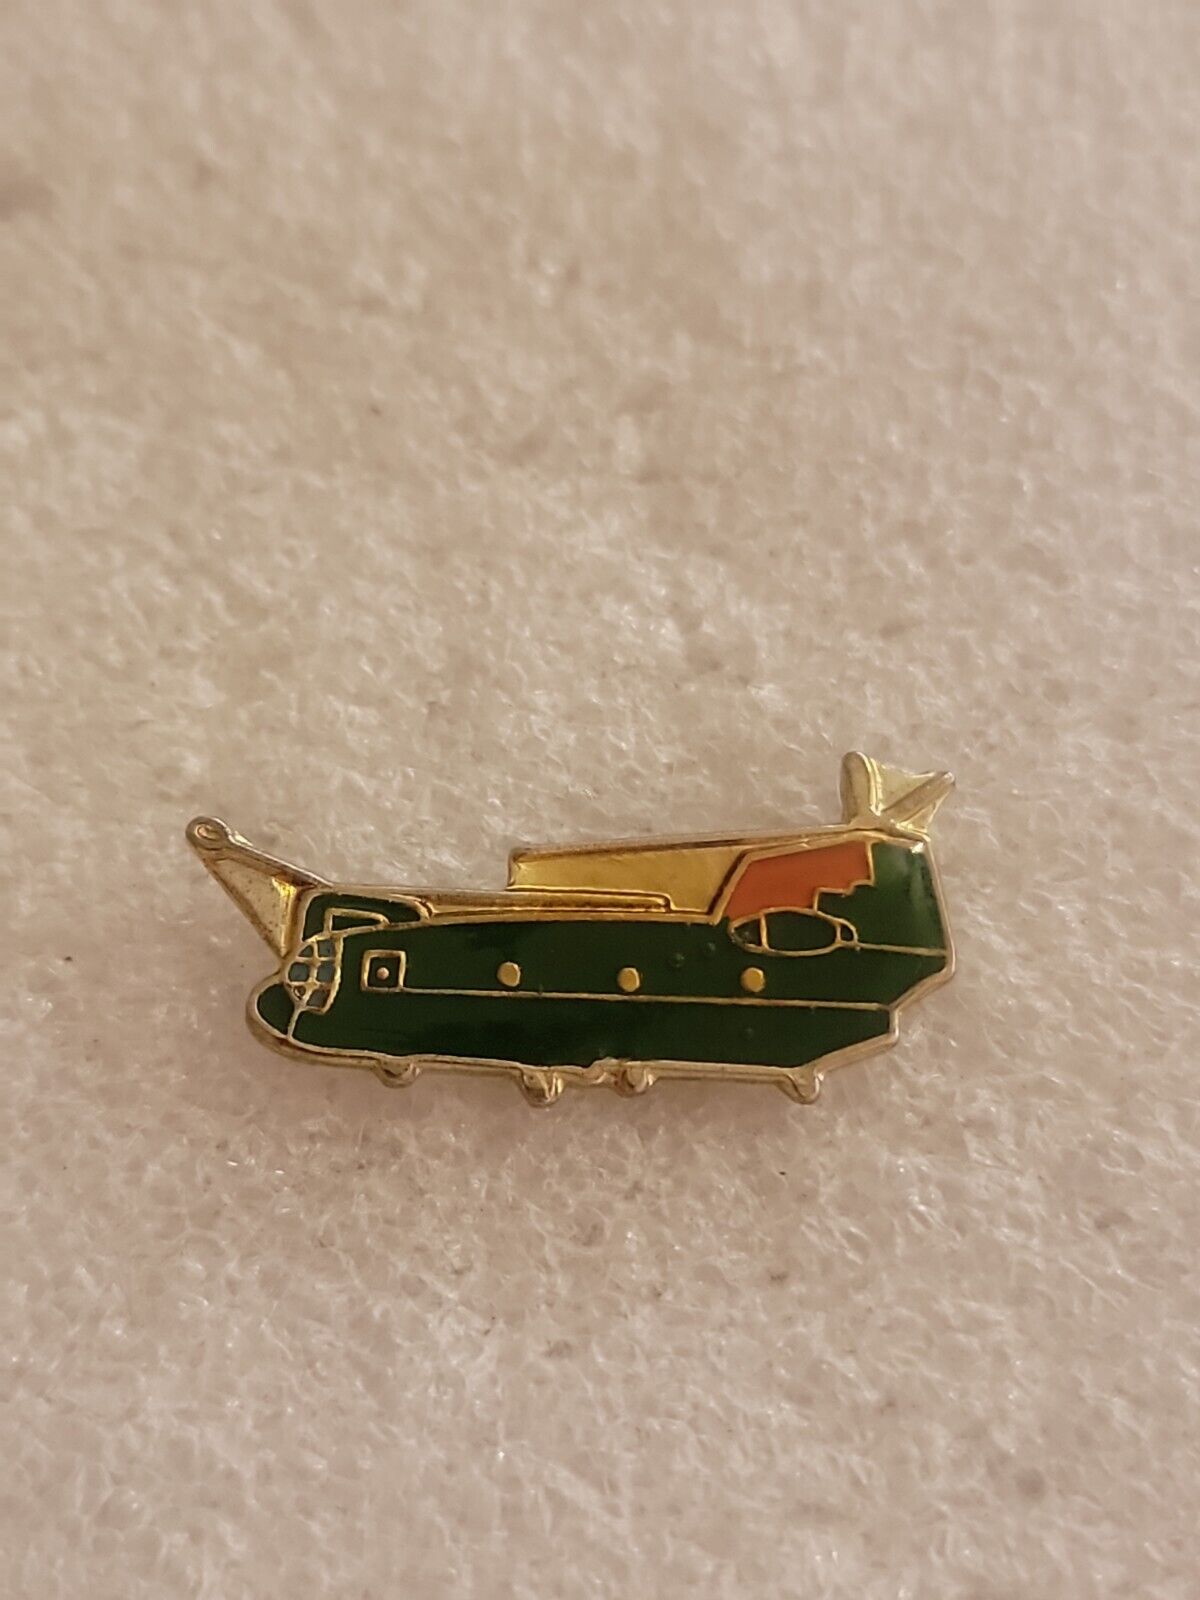 Boeing CH-47 Chinook Helicopter US Army Enamel Lapel Pin Single Clutch Back